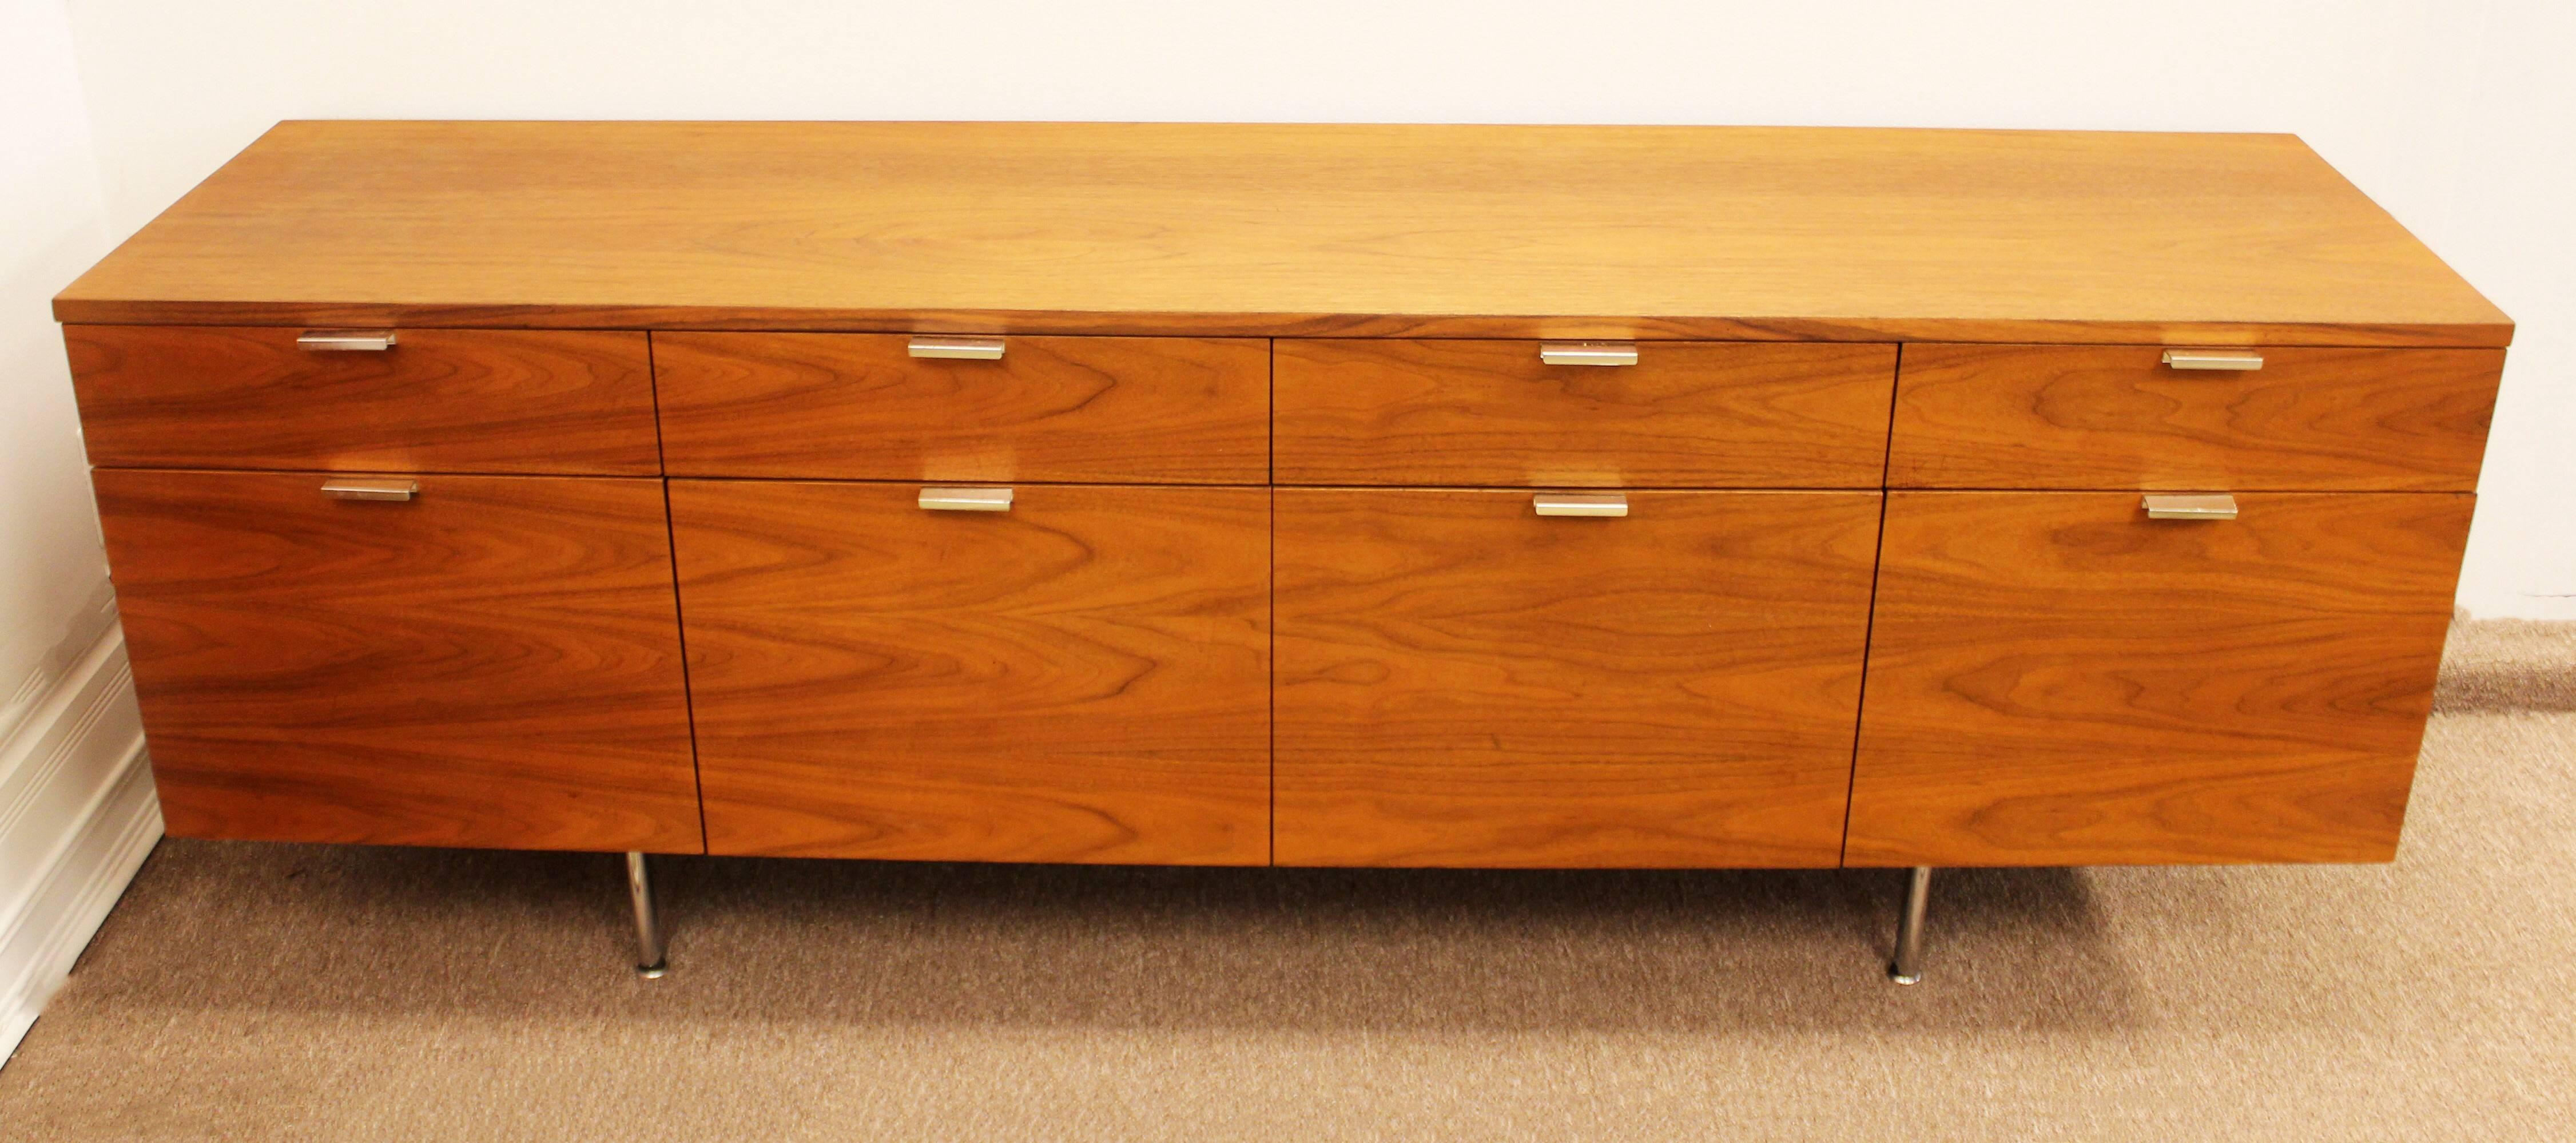 Signed beautiful eight-drawer credenza in walnut by George Nelson for Herman Miller. Chrome legs and chrome pulls with four shallow and four deep drawers.